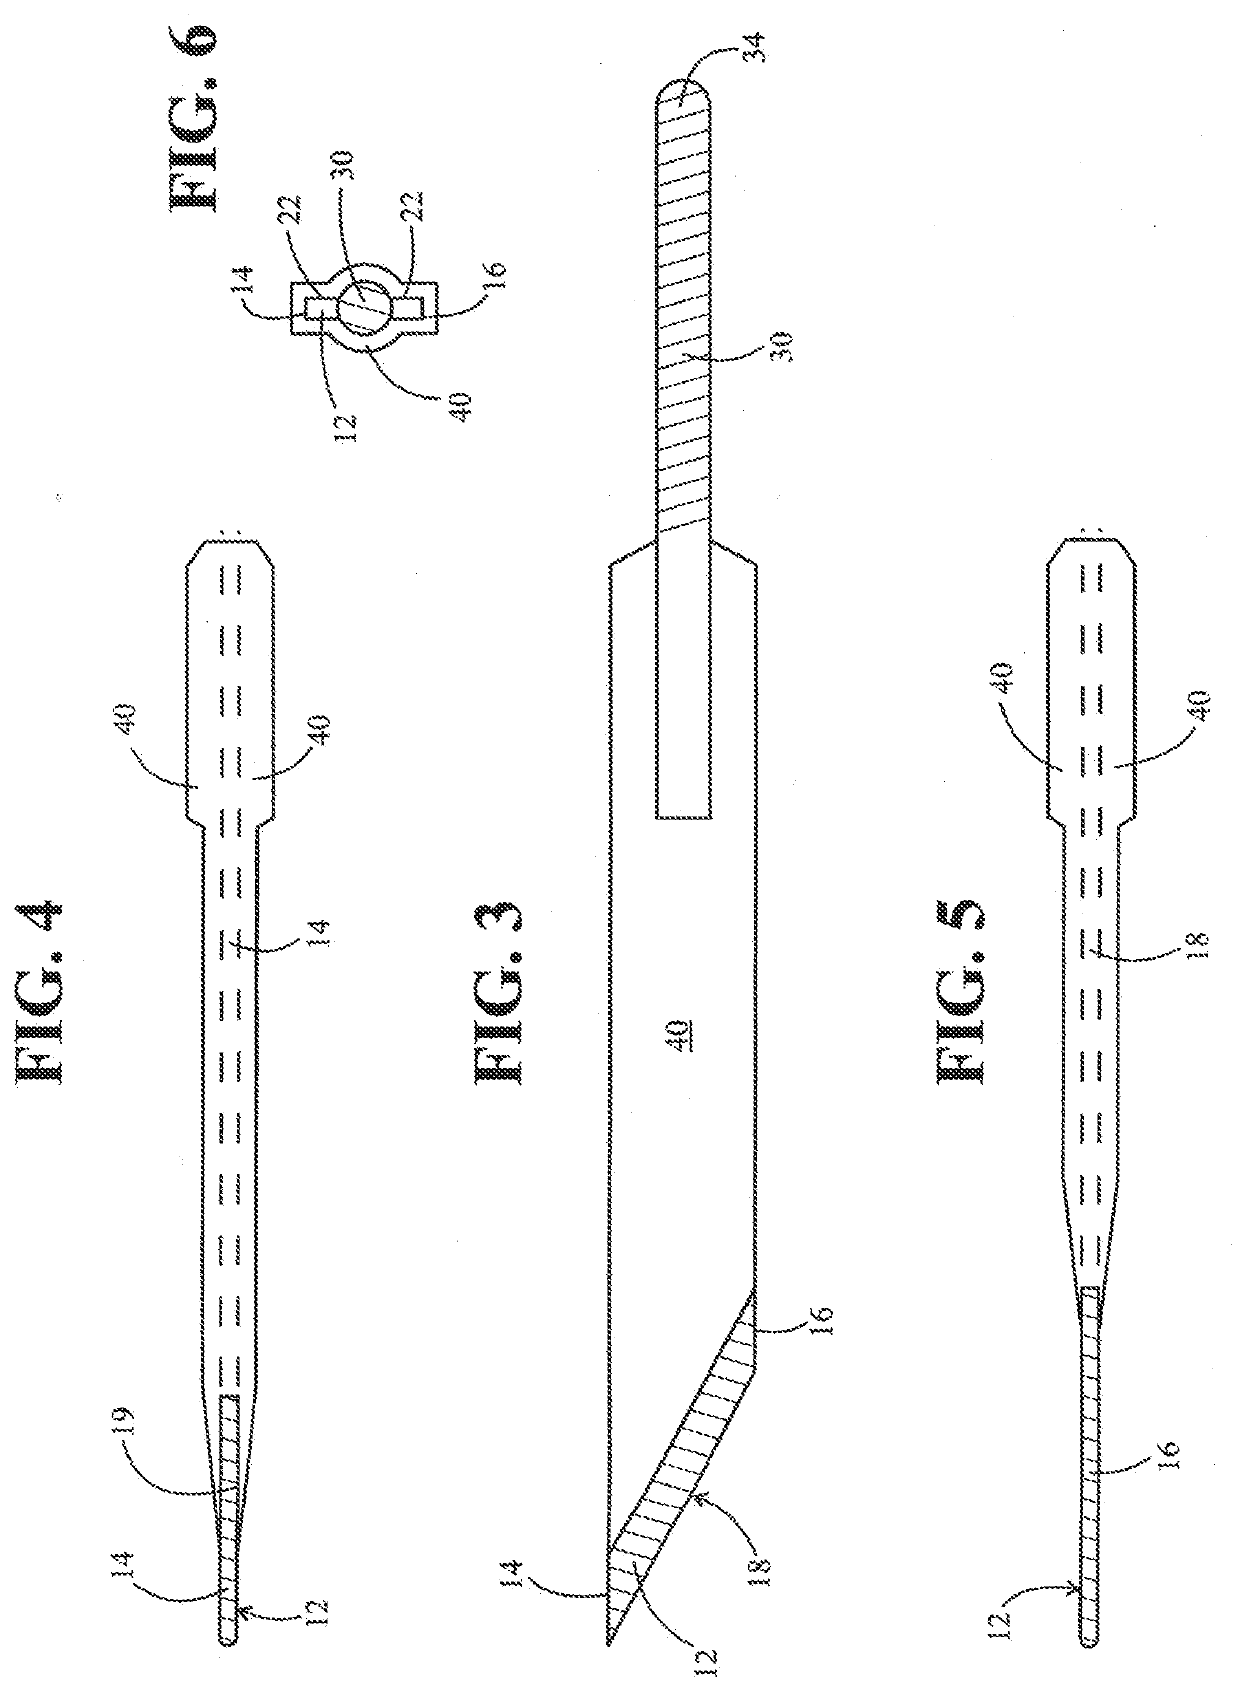 Monopolar electrosurgery blade and electrosurgery blade assembly